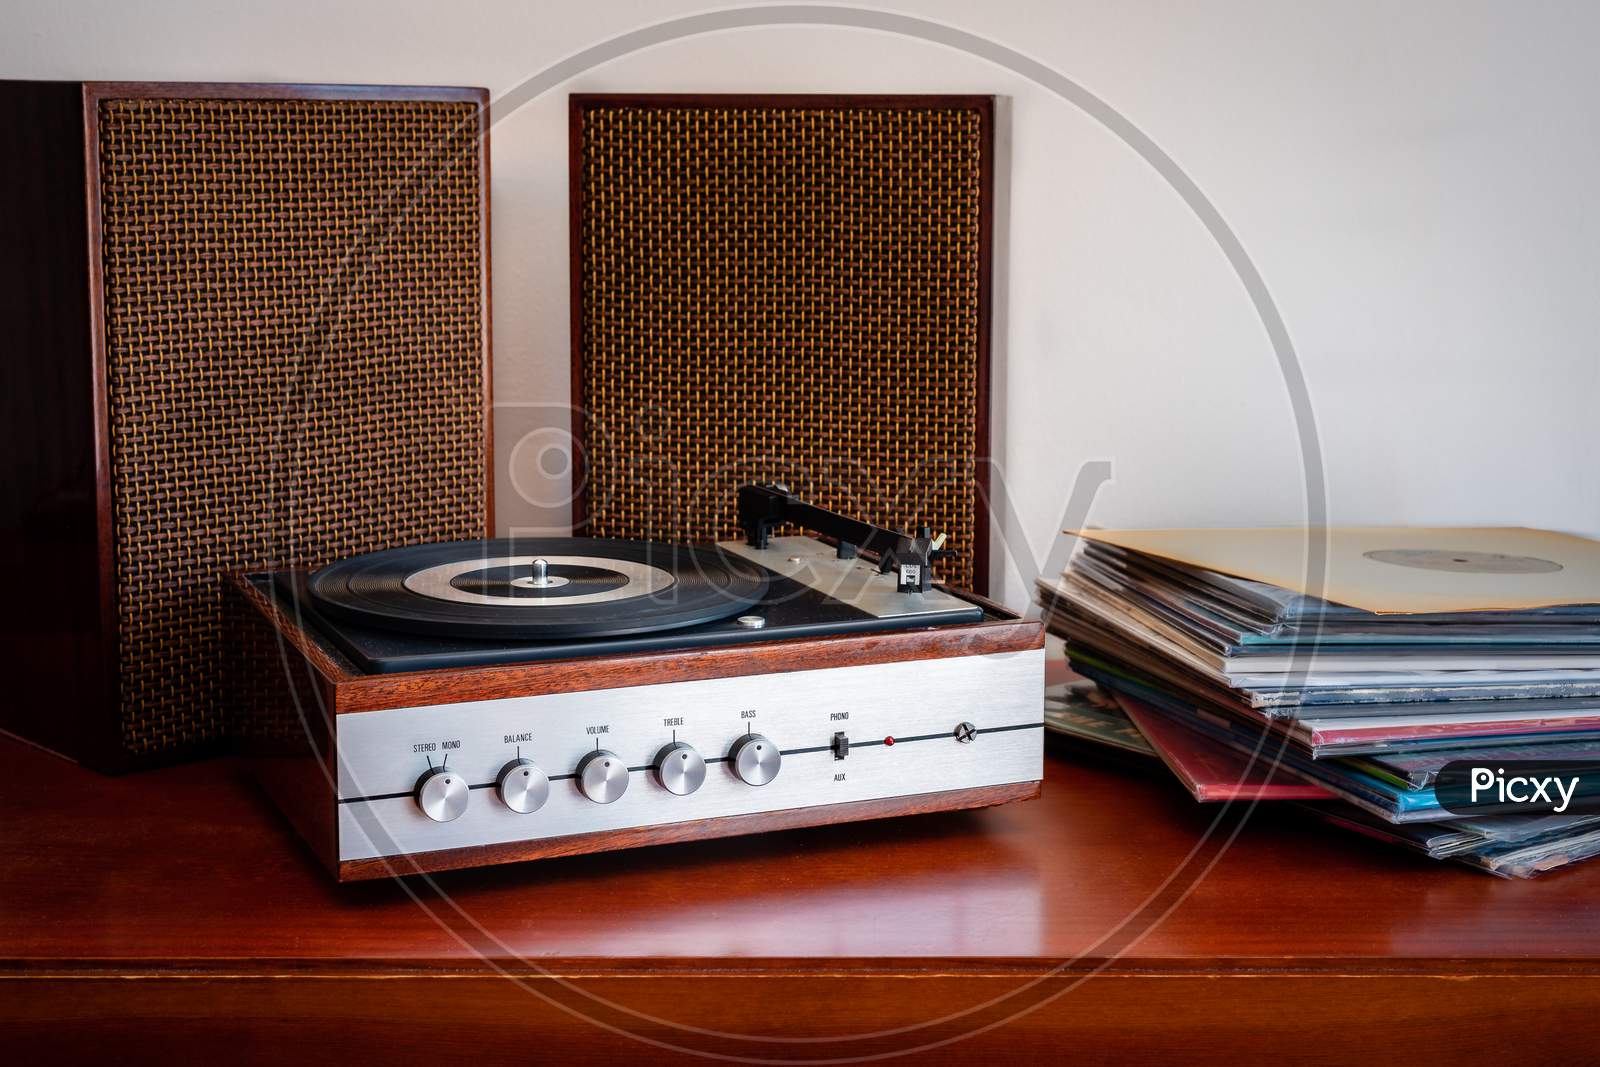 Vintage turntable made of wood with speakers and vinyls on an old table